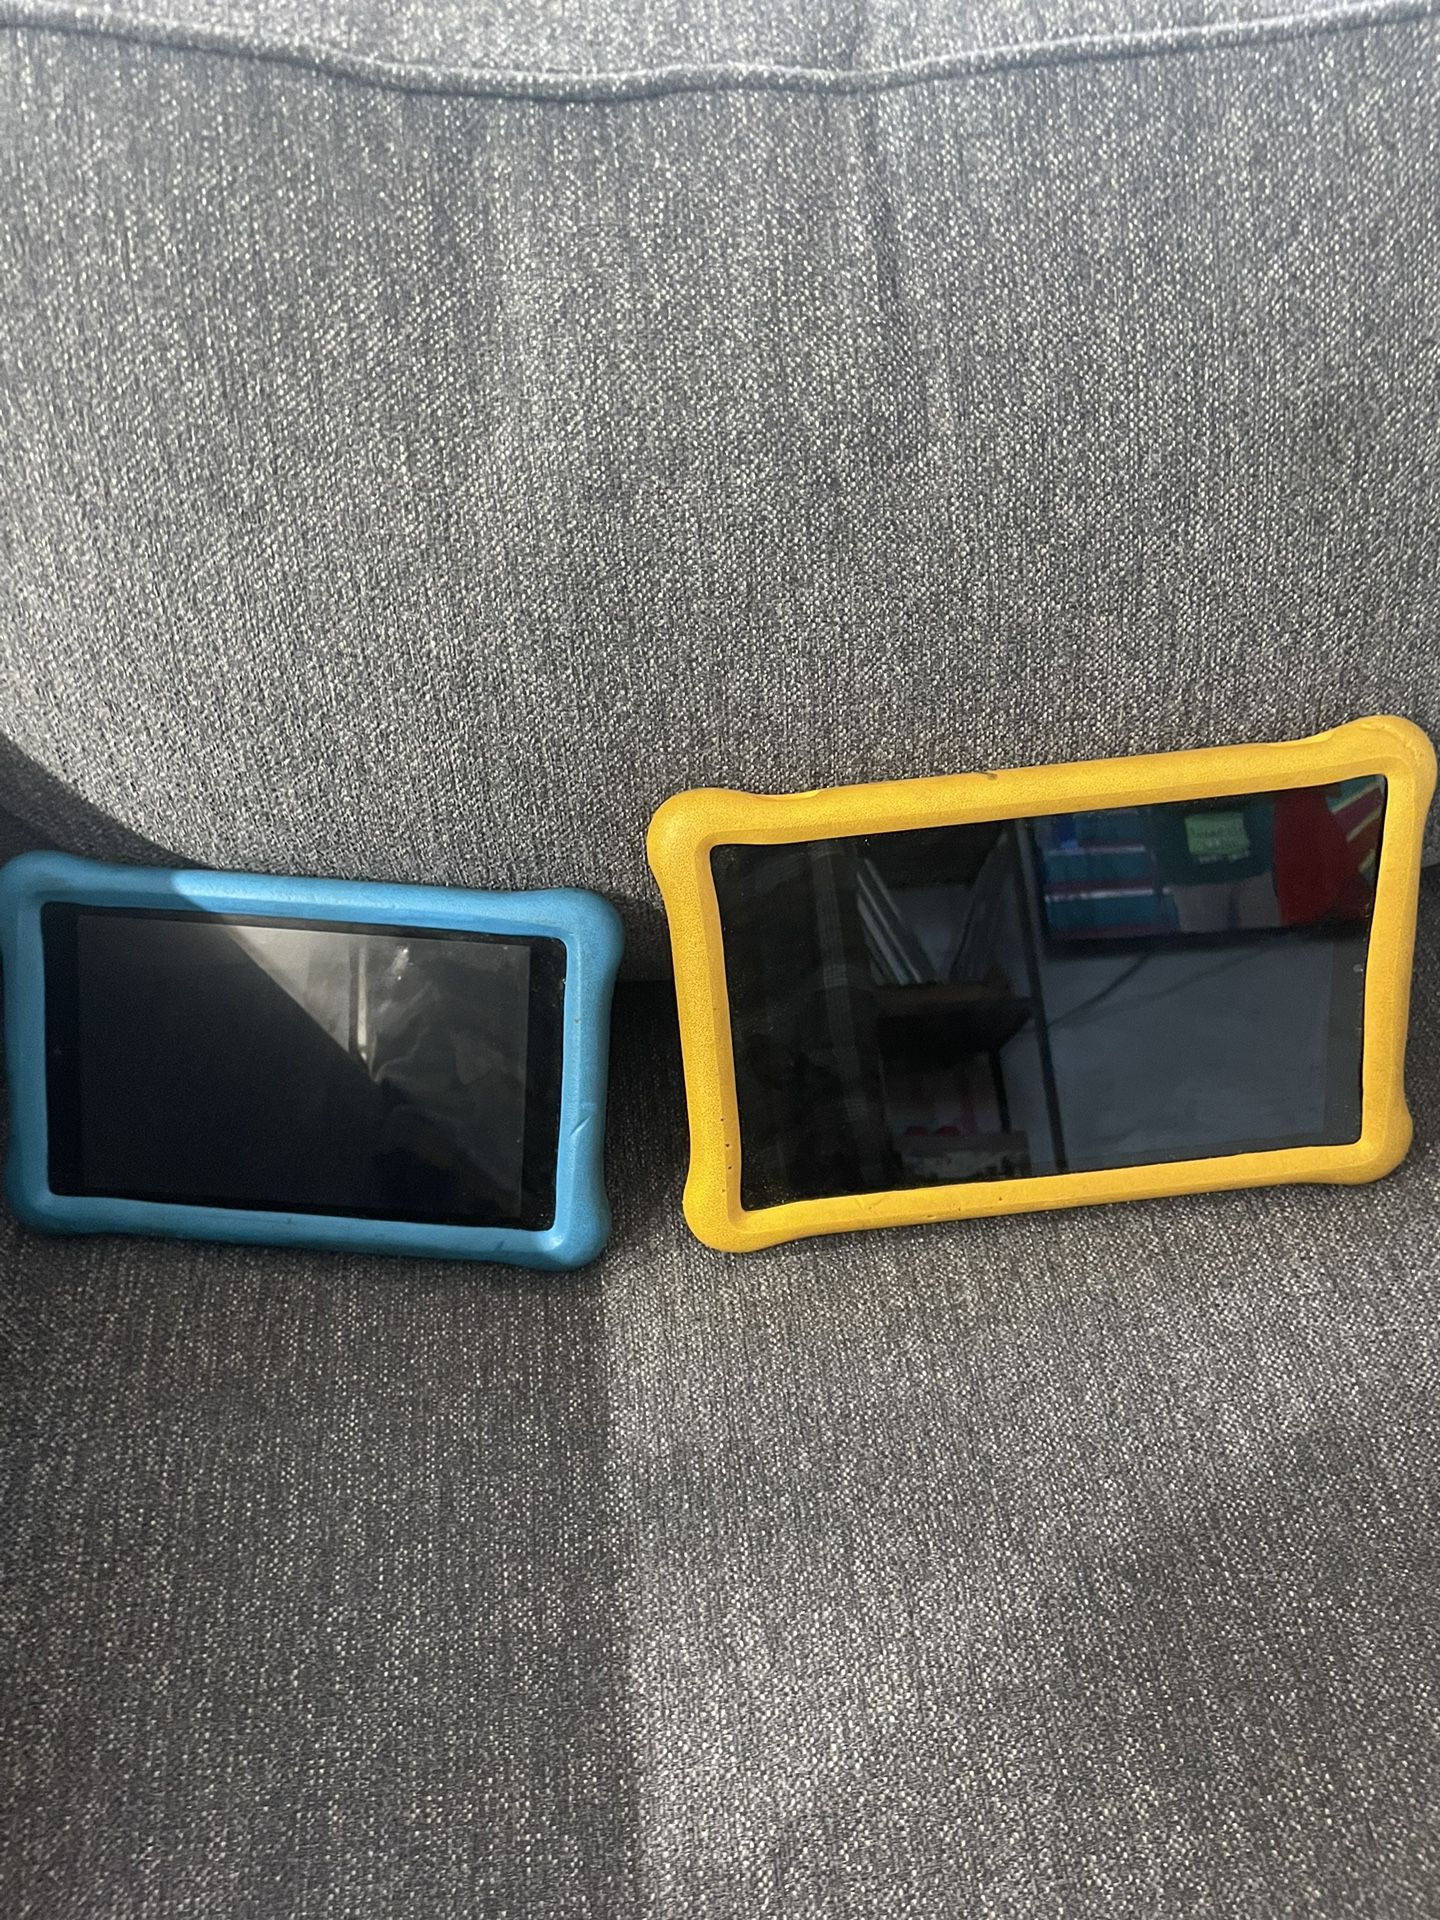 2 Amazon Fire Tablets